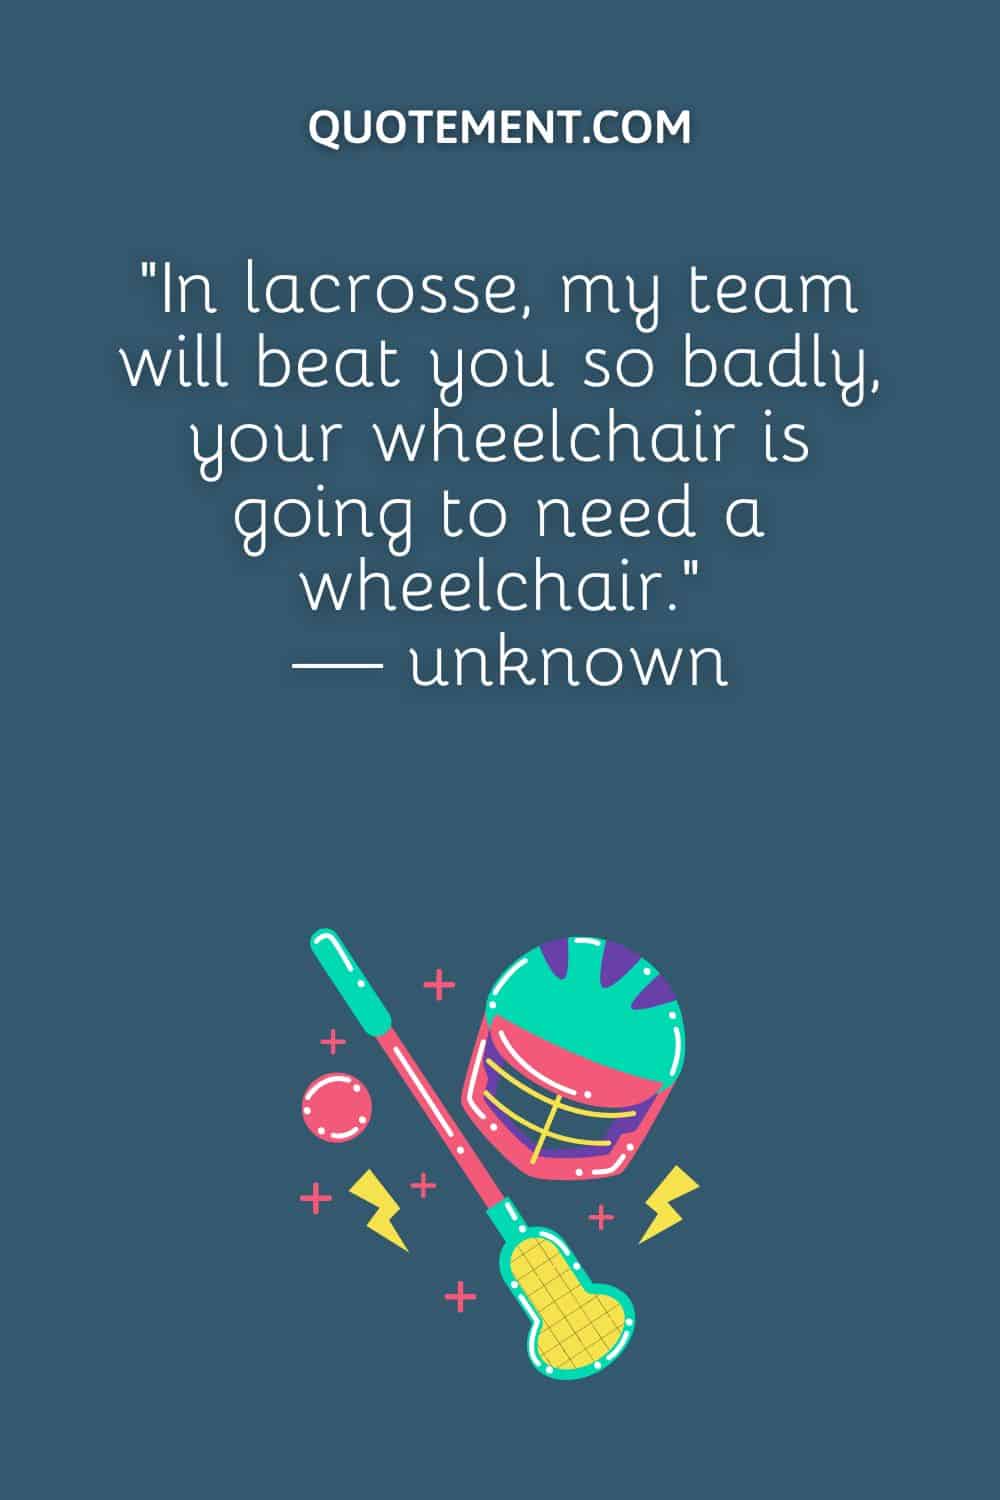 “In lacrosse, my team will beat you so badly, your wheelchair is going to need a wheelchair.” — unknown